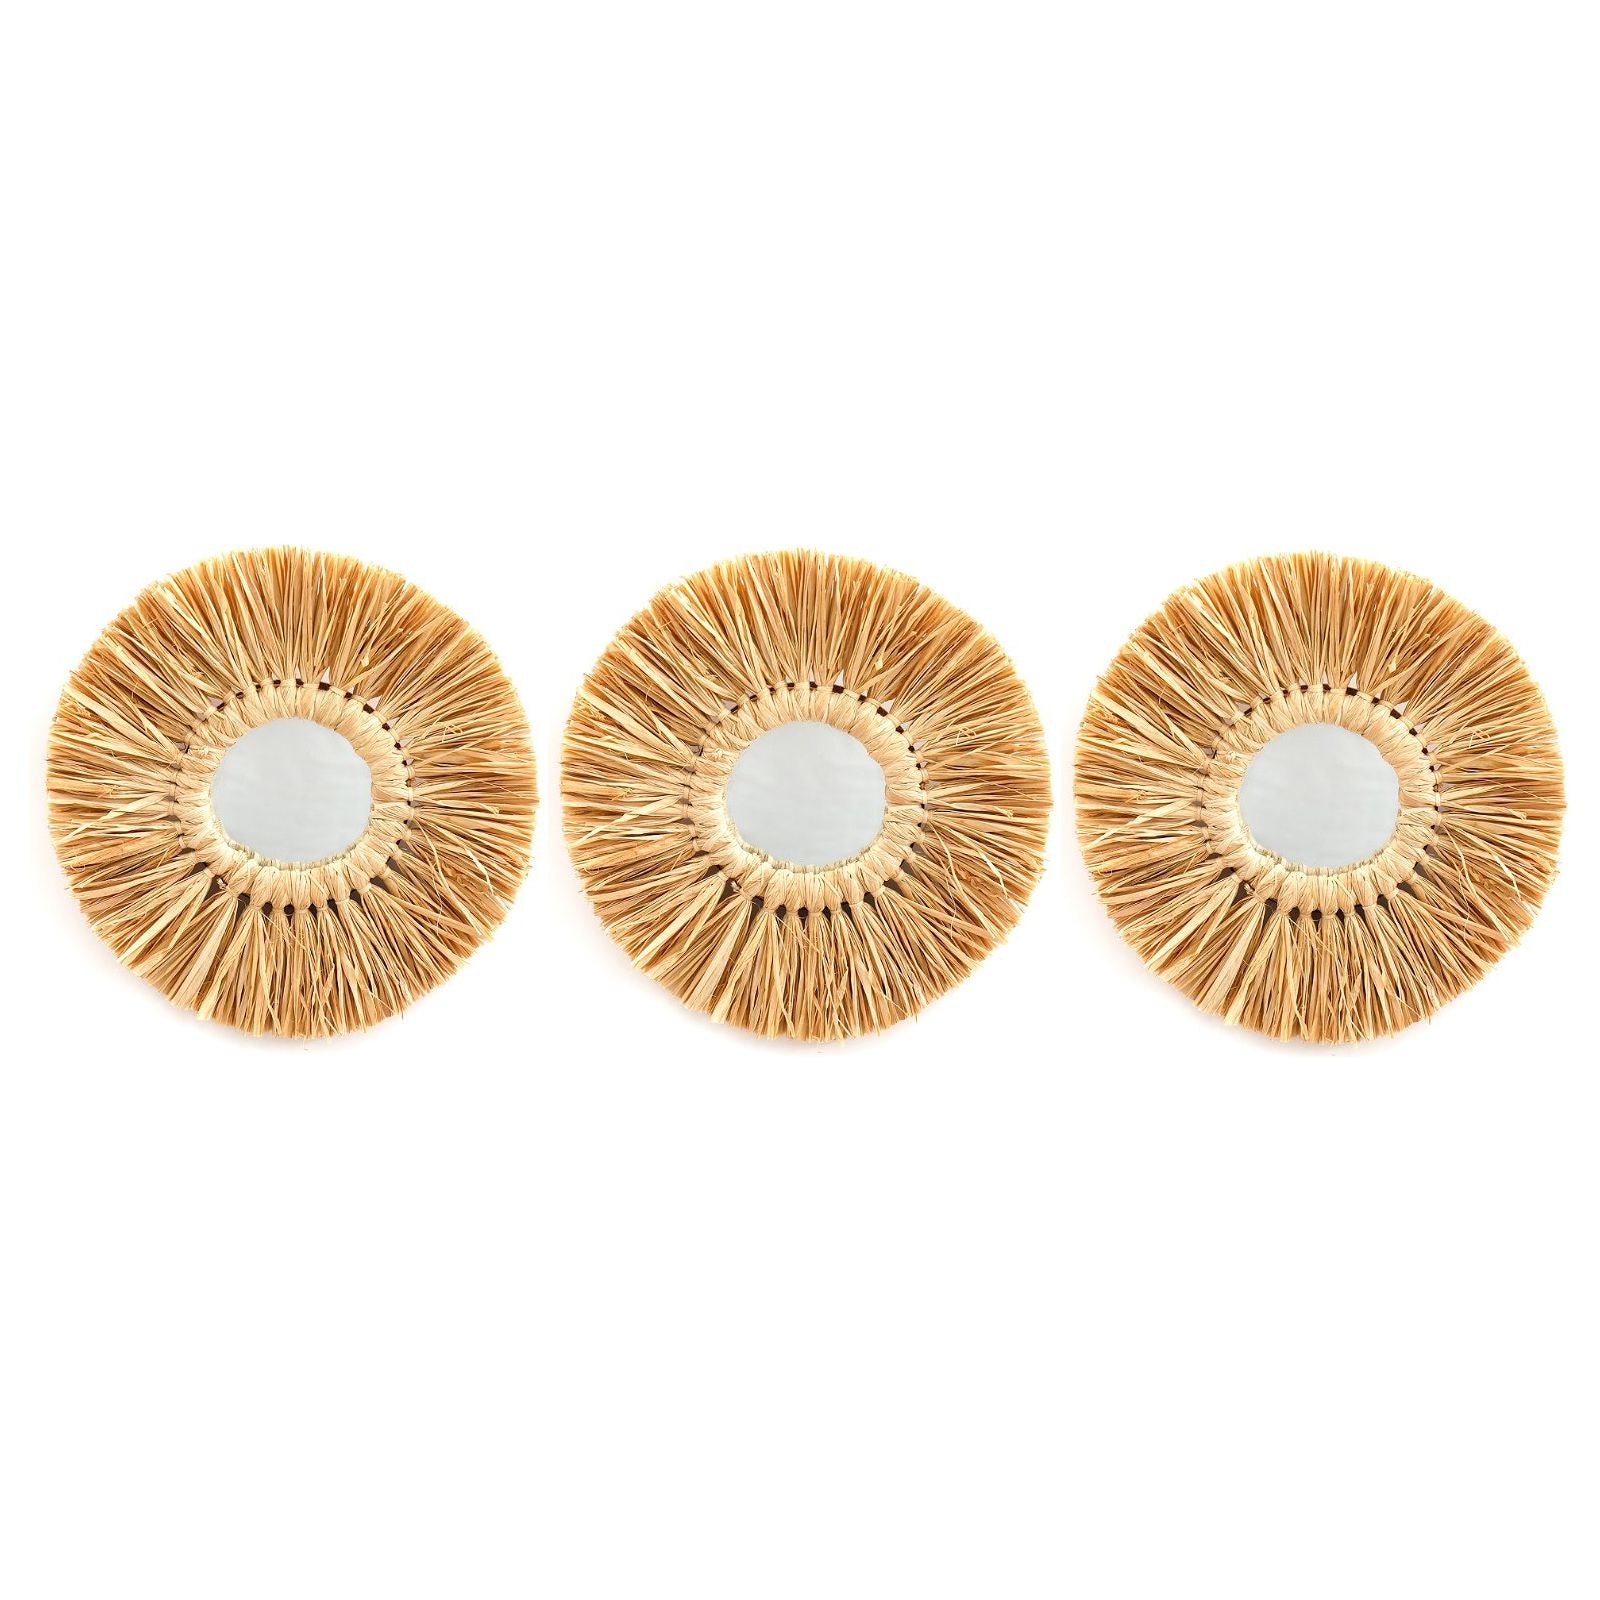 Set of Three Dried Grass Mirrors - Ashton and Finch